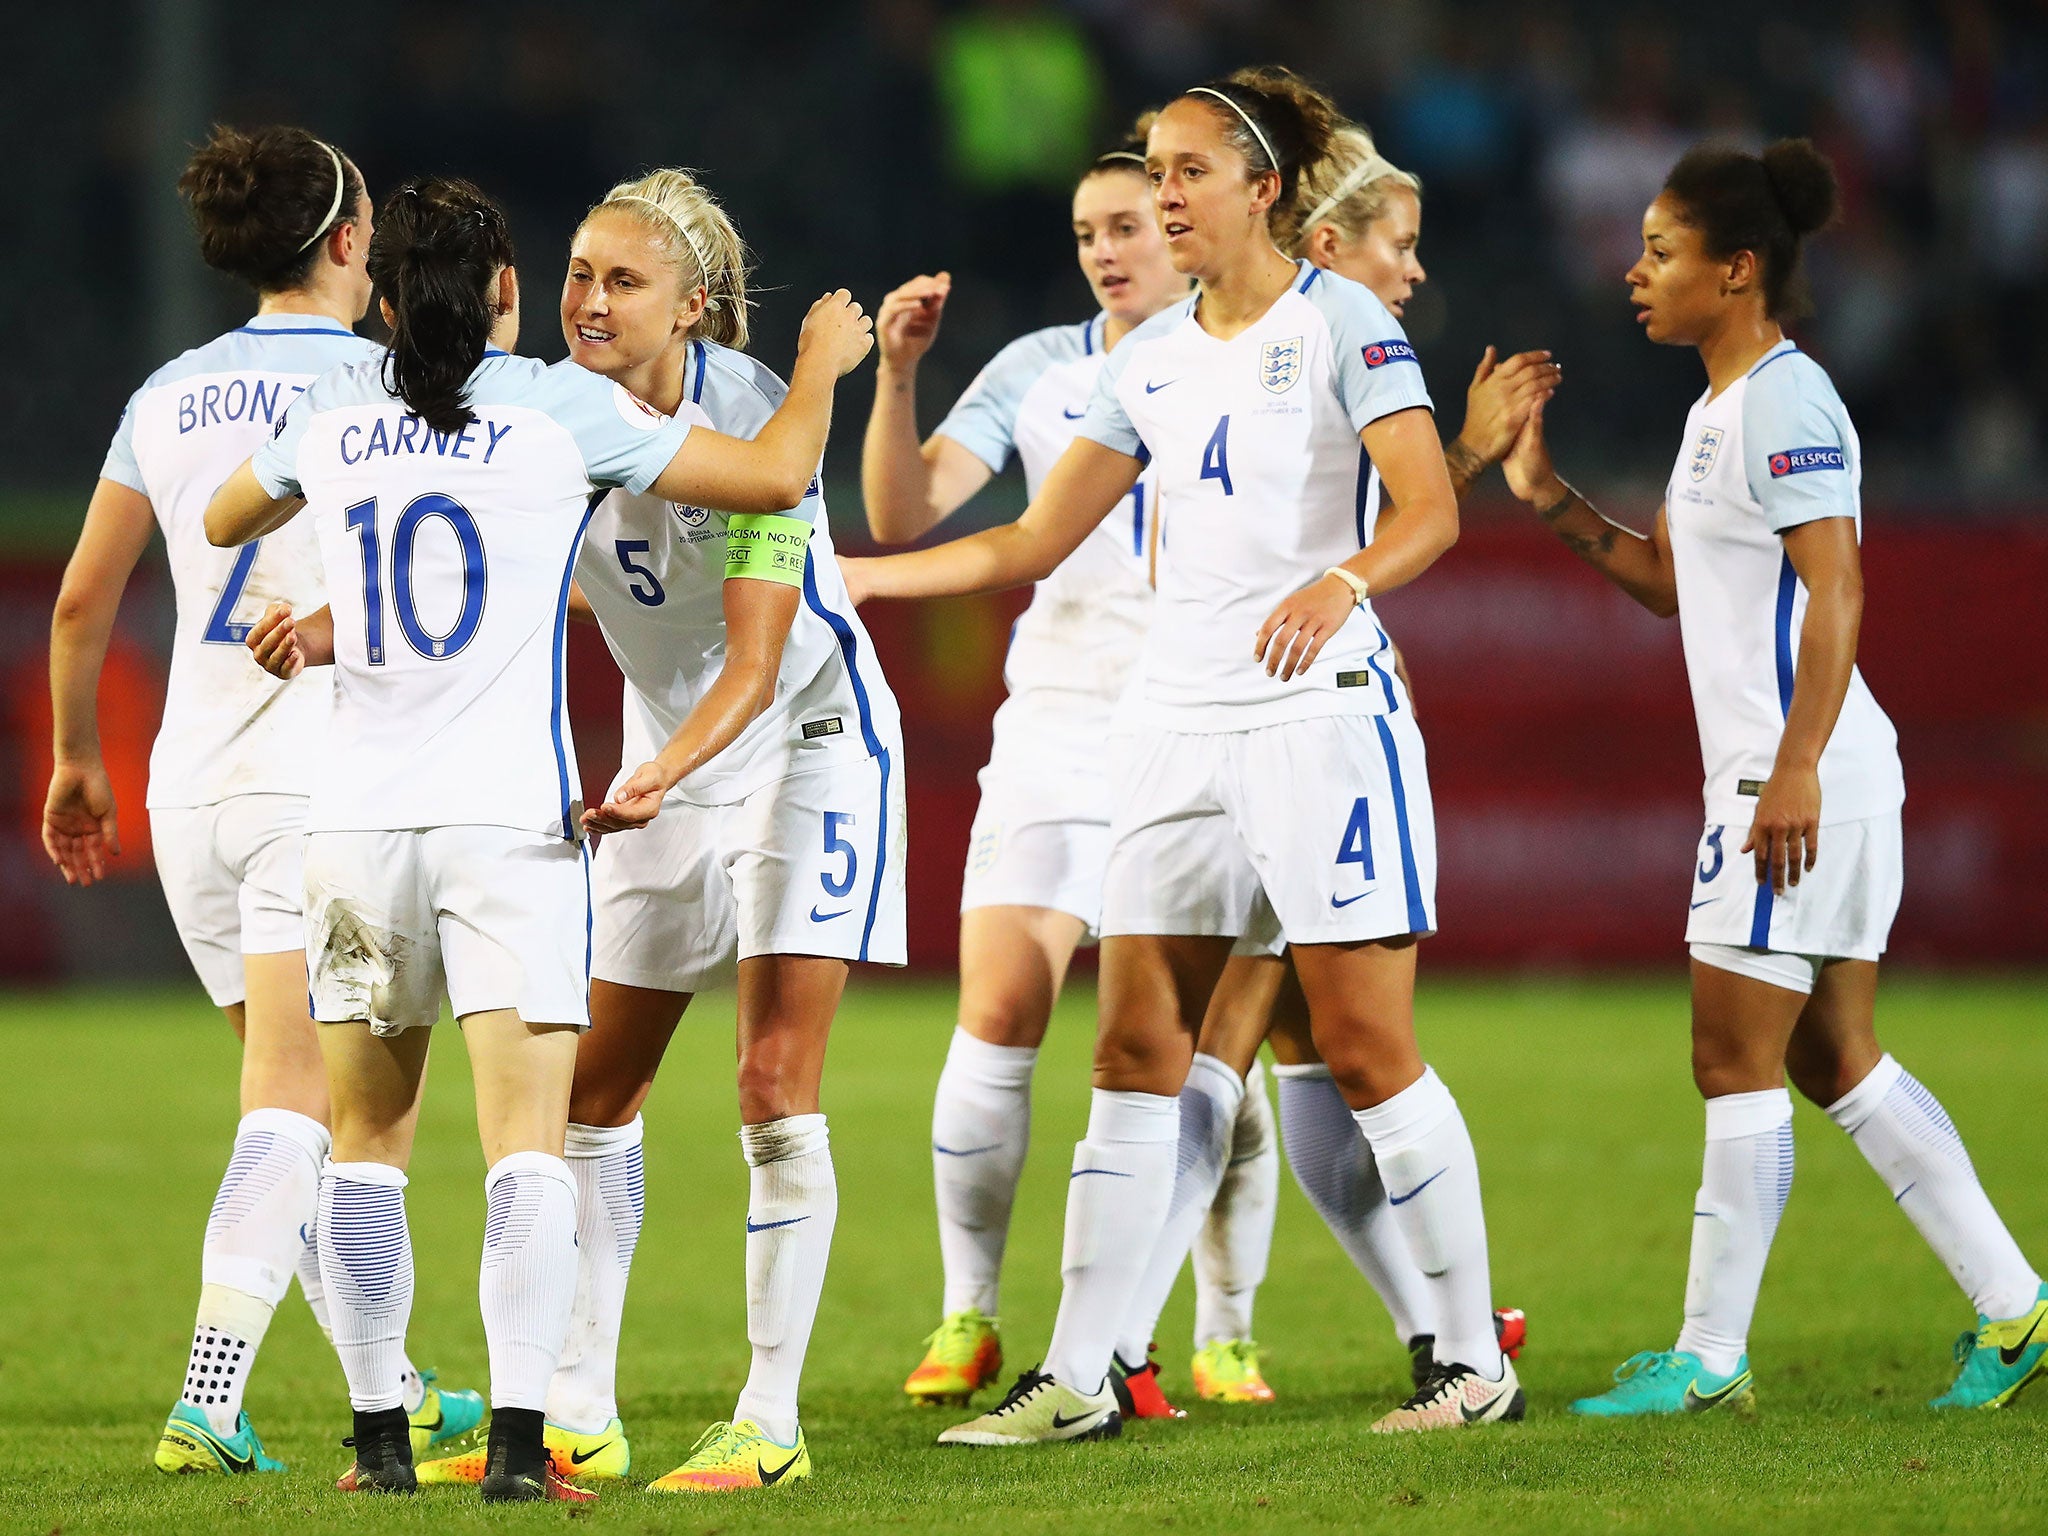 The Lionesses are helping drive forward the profile of the women's game in England